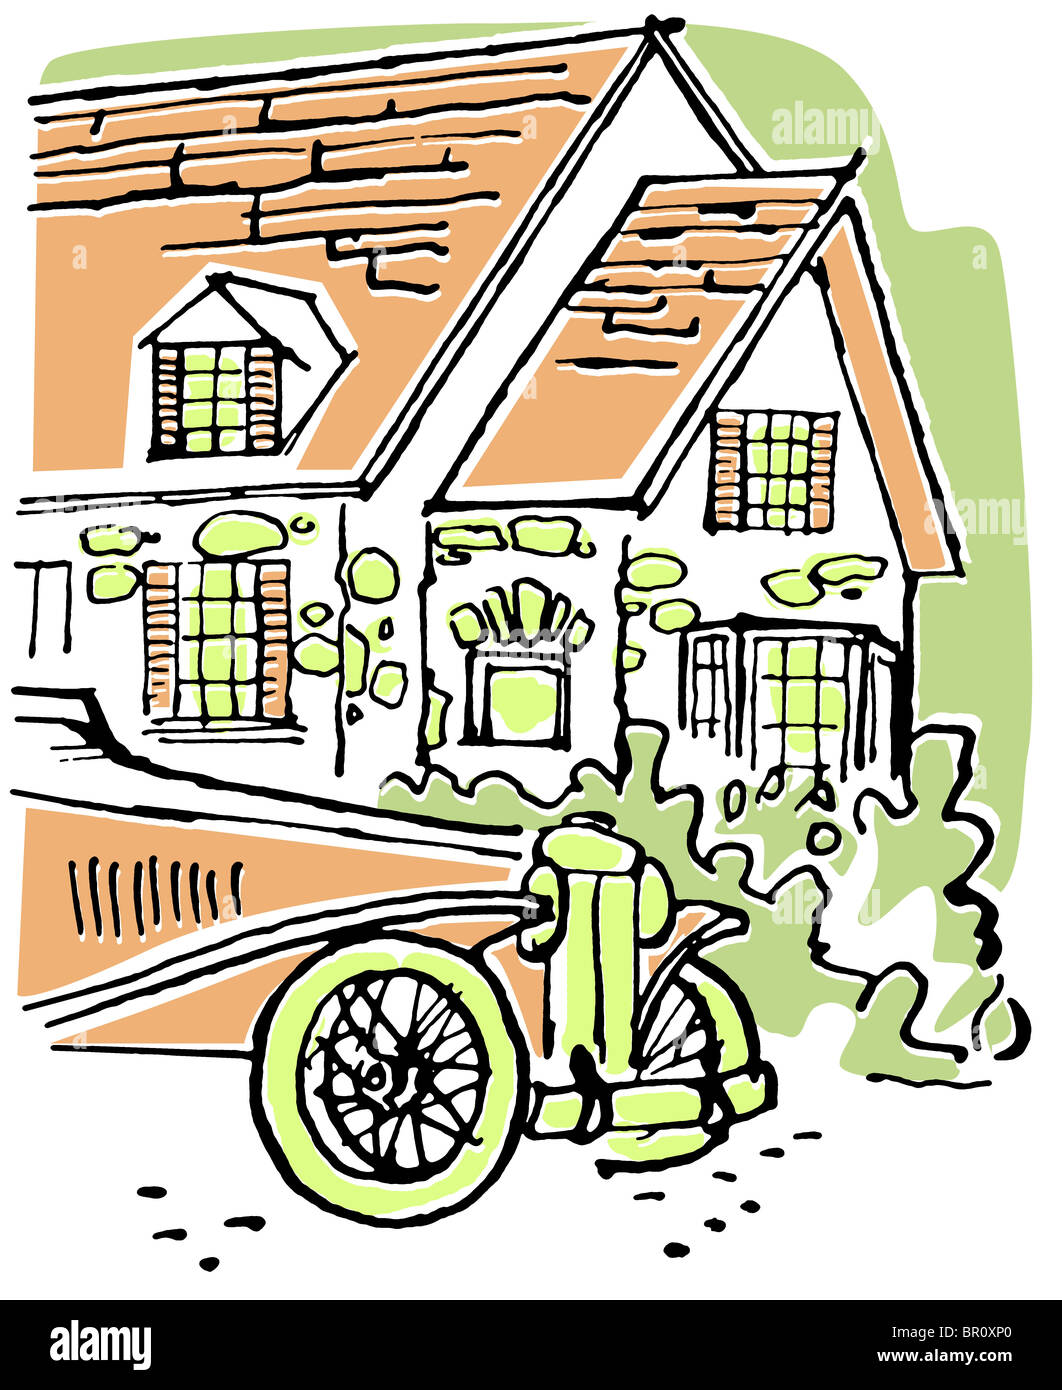 An illustration of a home with an old fashioned car in the foreground Stock Photo